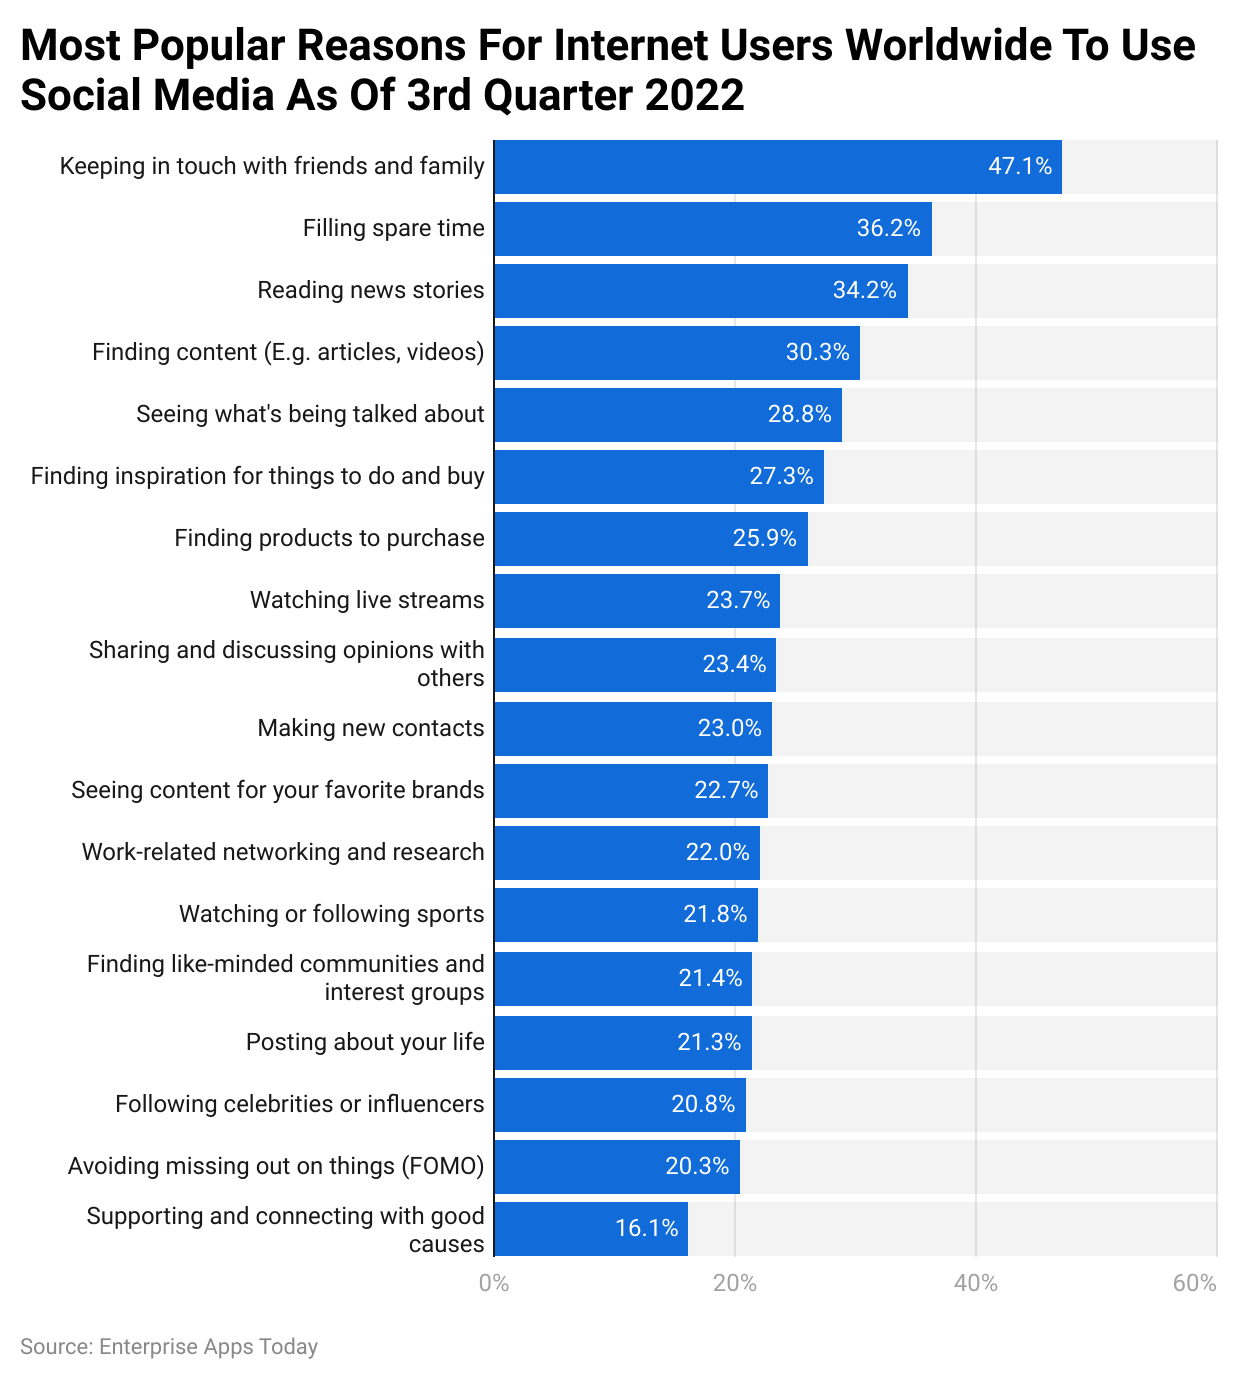 Most popular reasons for internet users worldwide to use social media as of 3rd quarter 2022